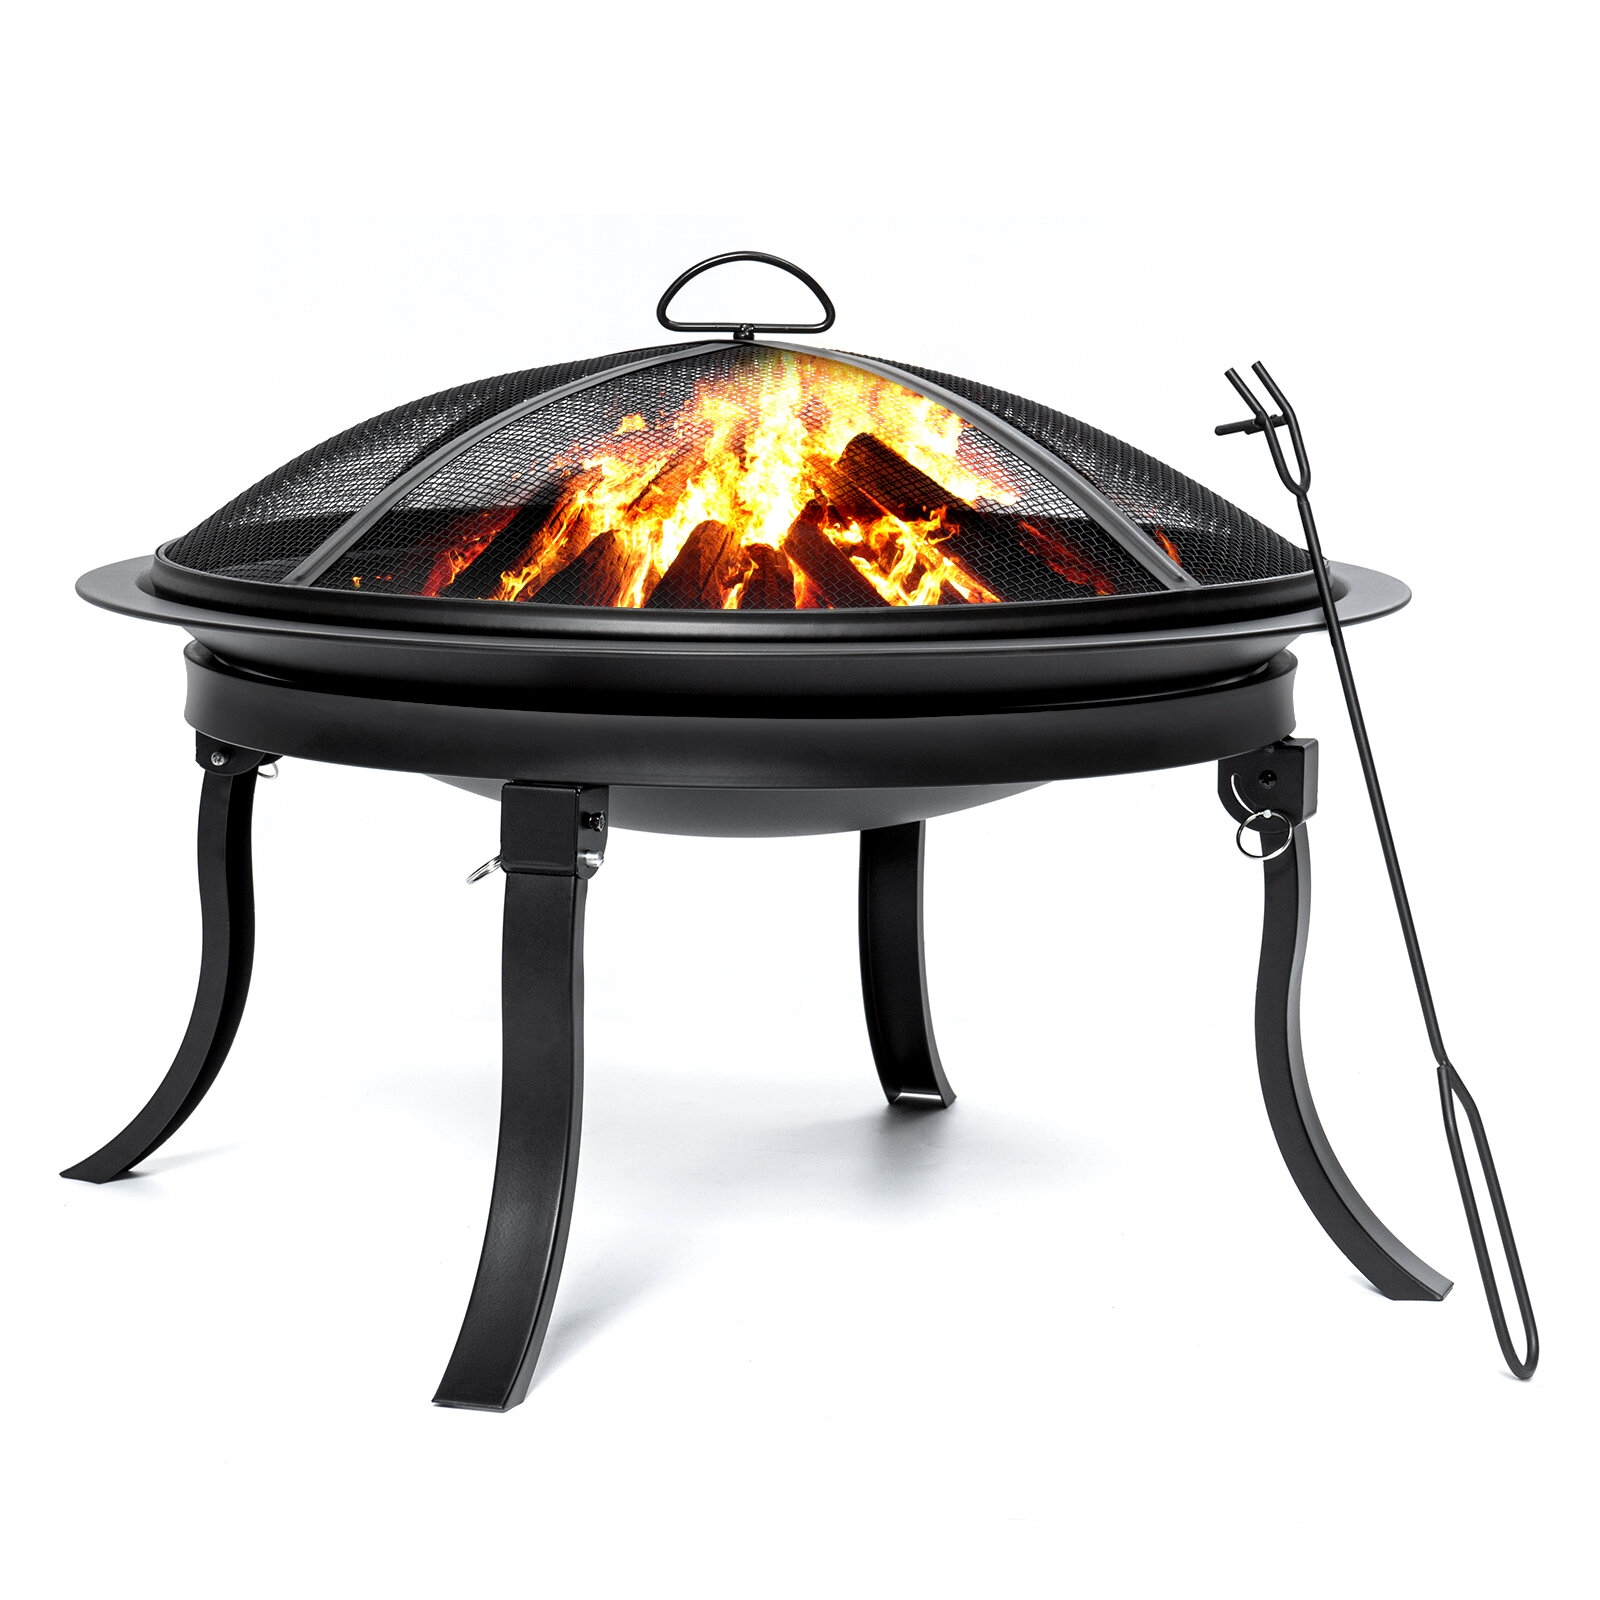 Kingso 24inch Portable Fire Pits With 4, Fire Pit Legs